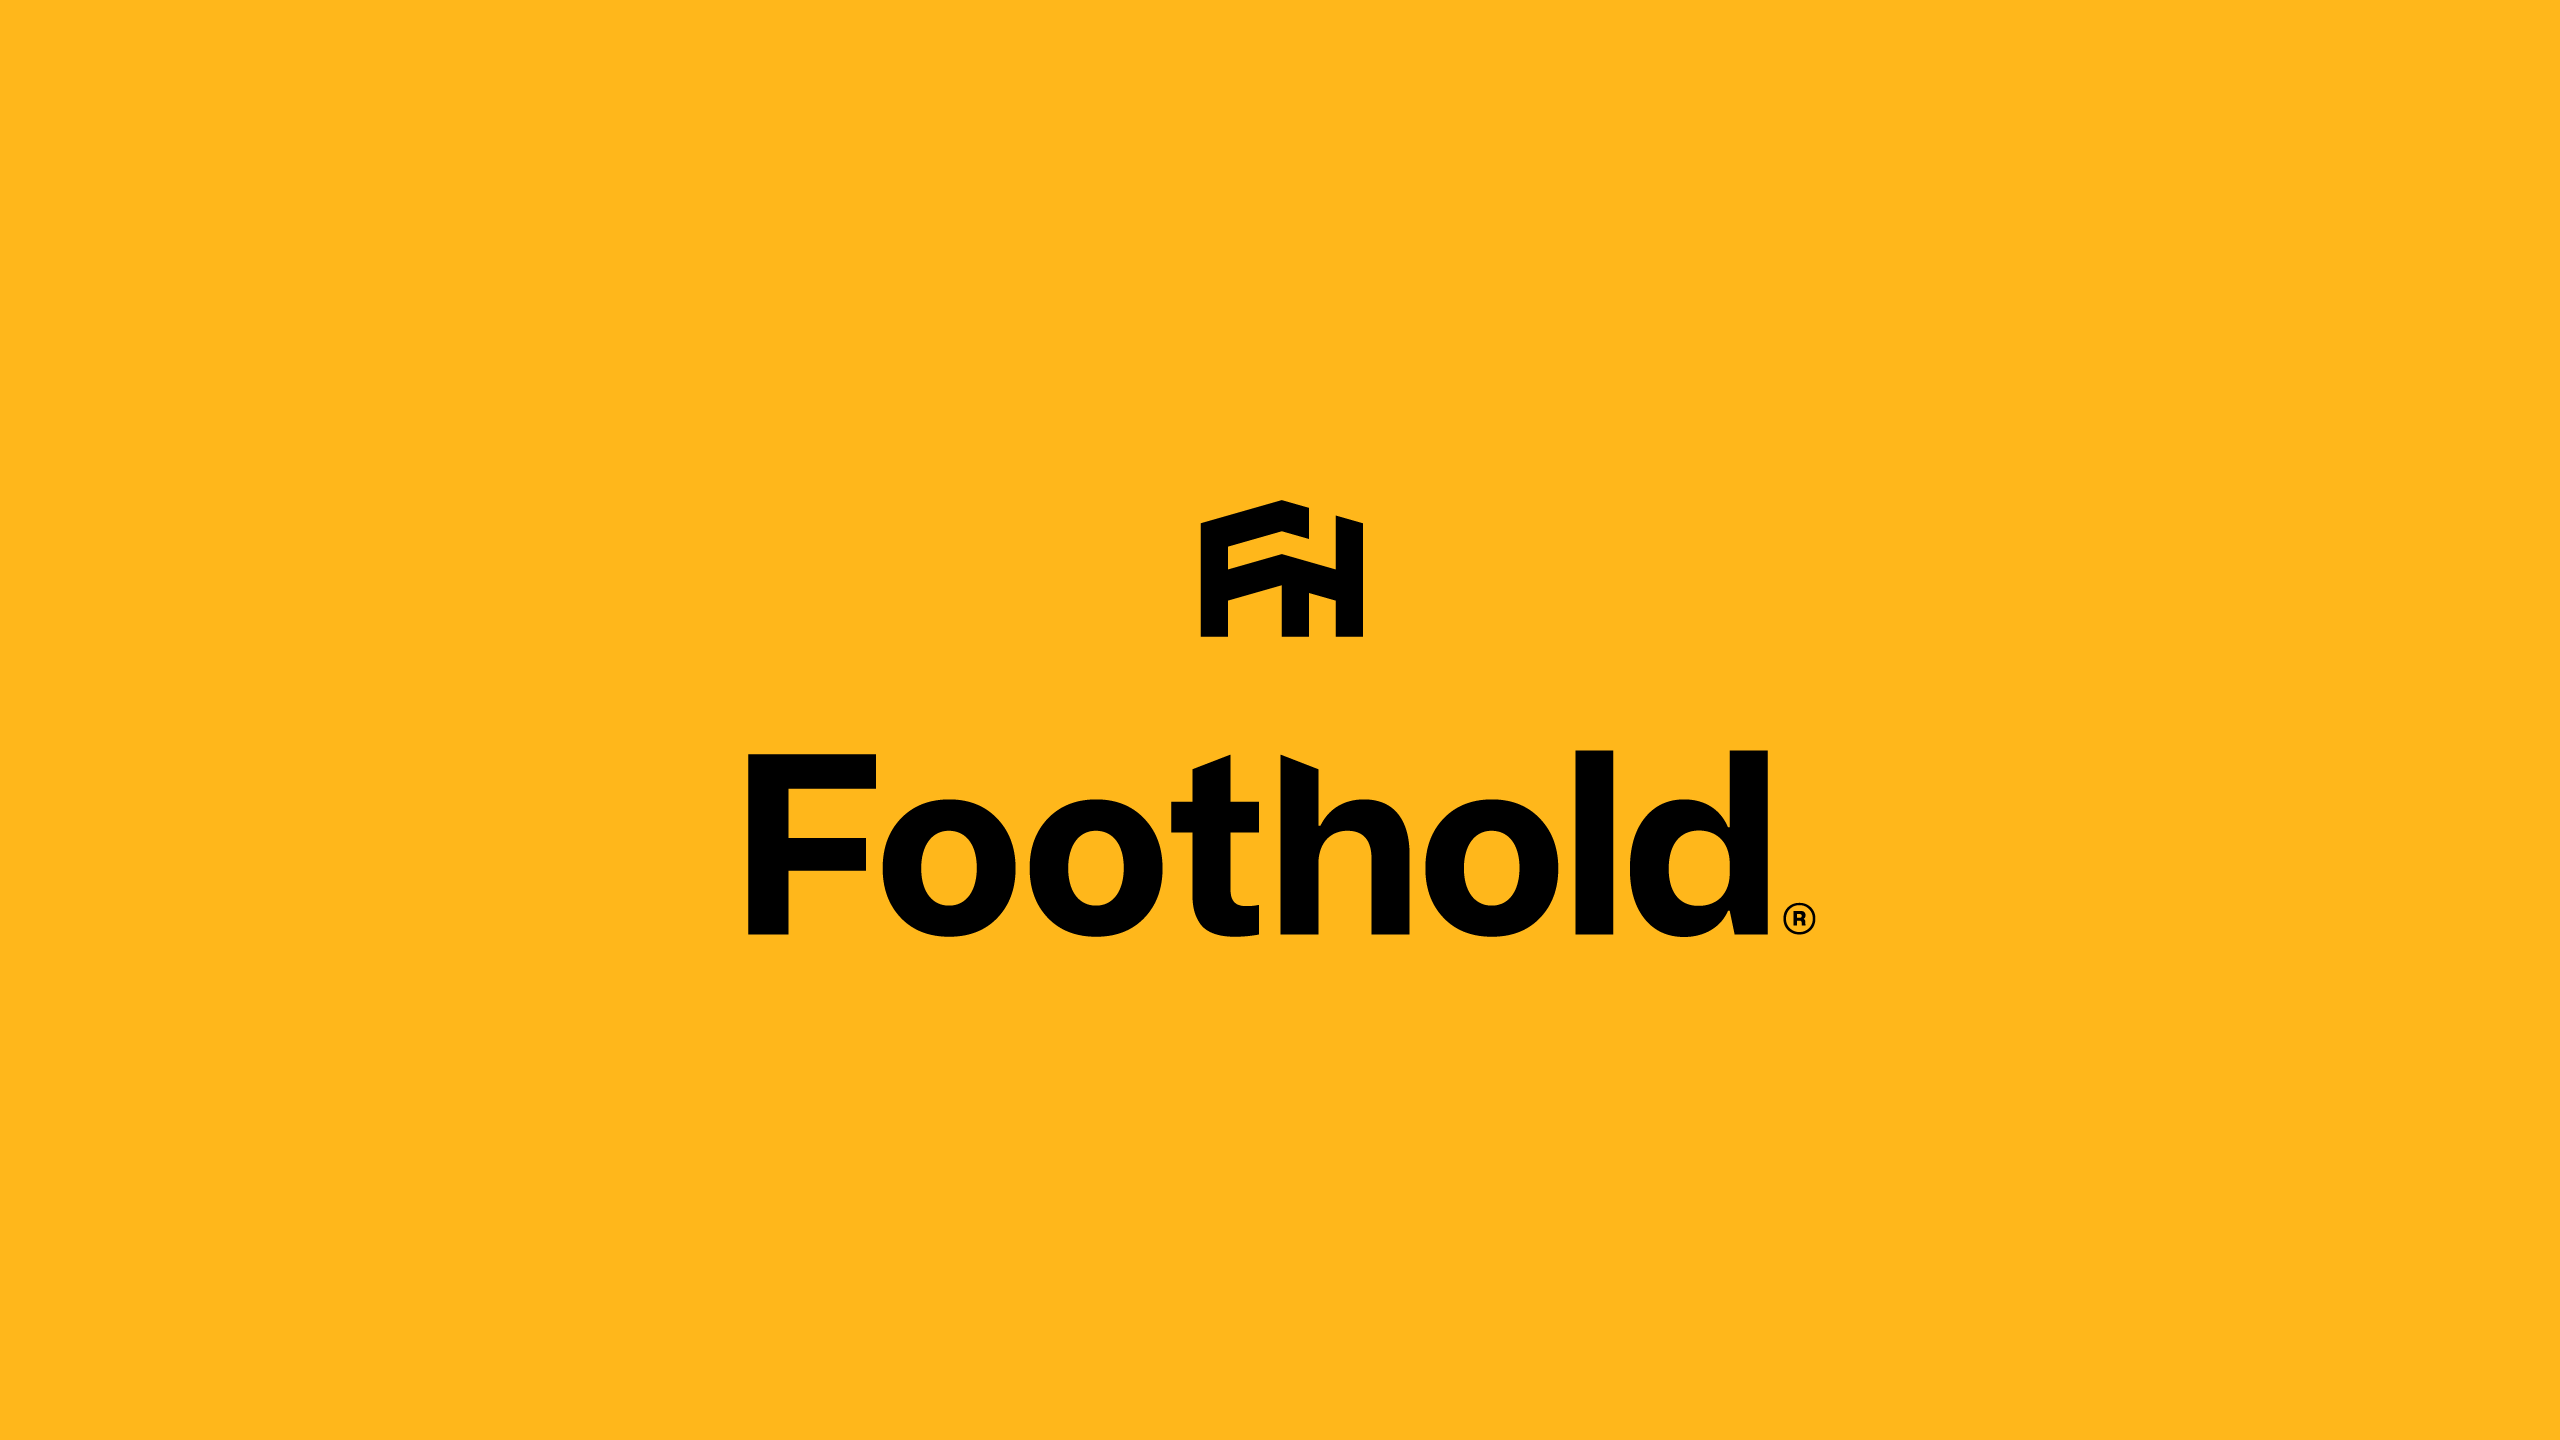 Foothold-02